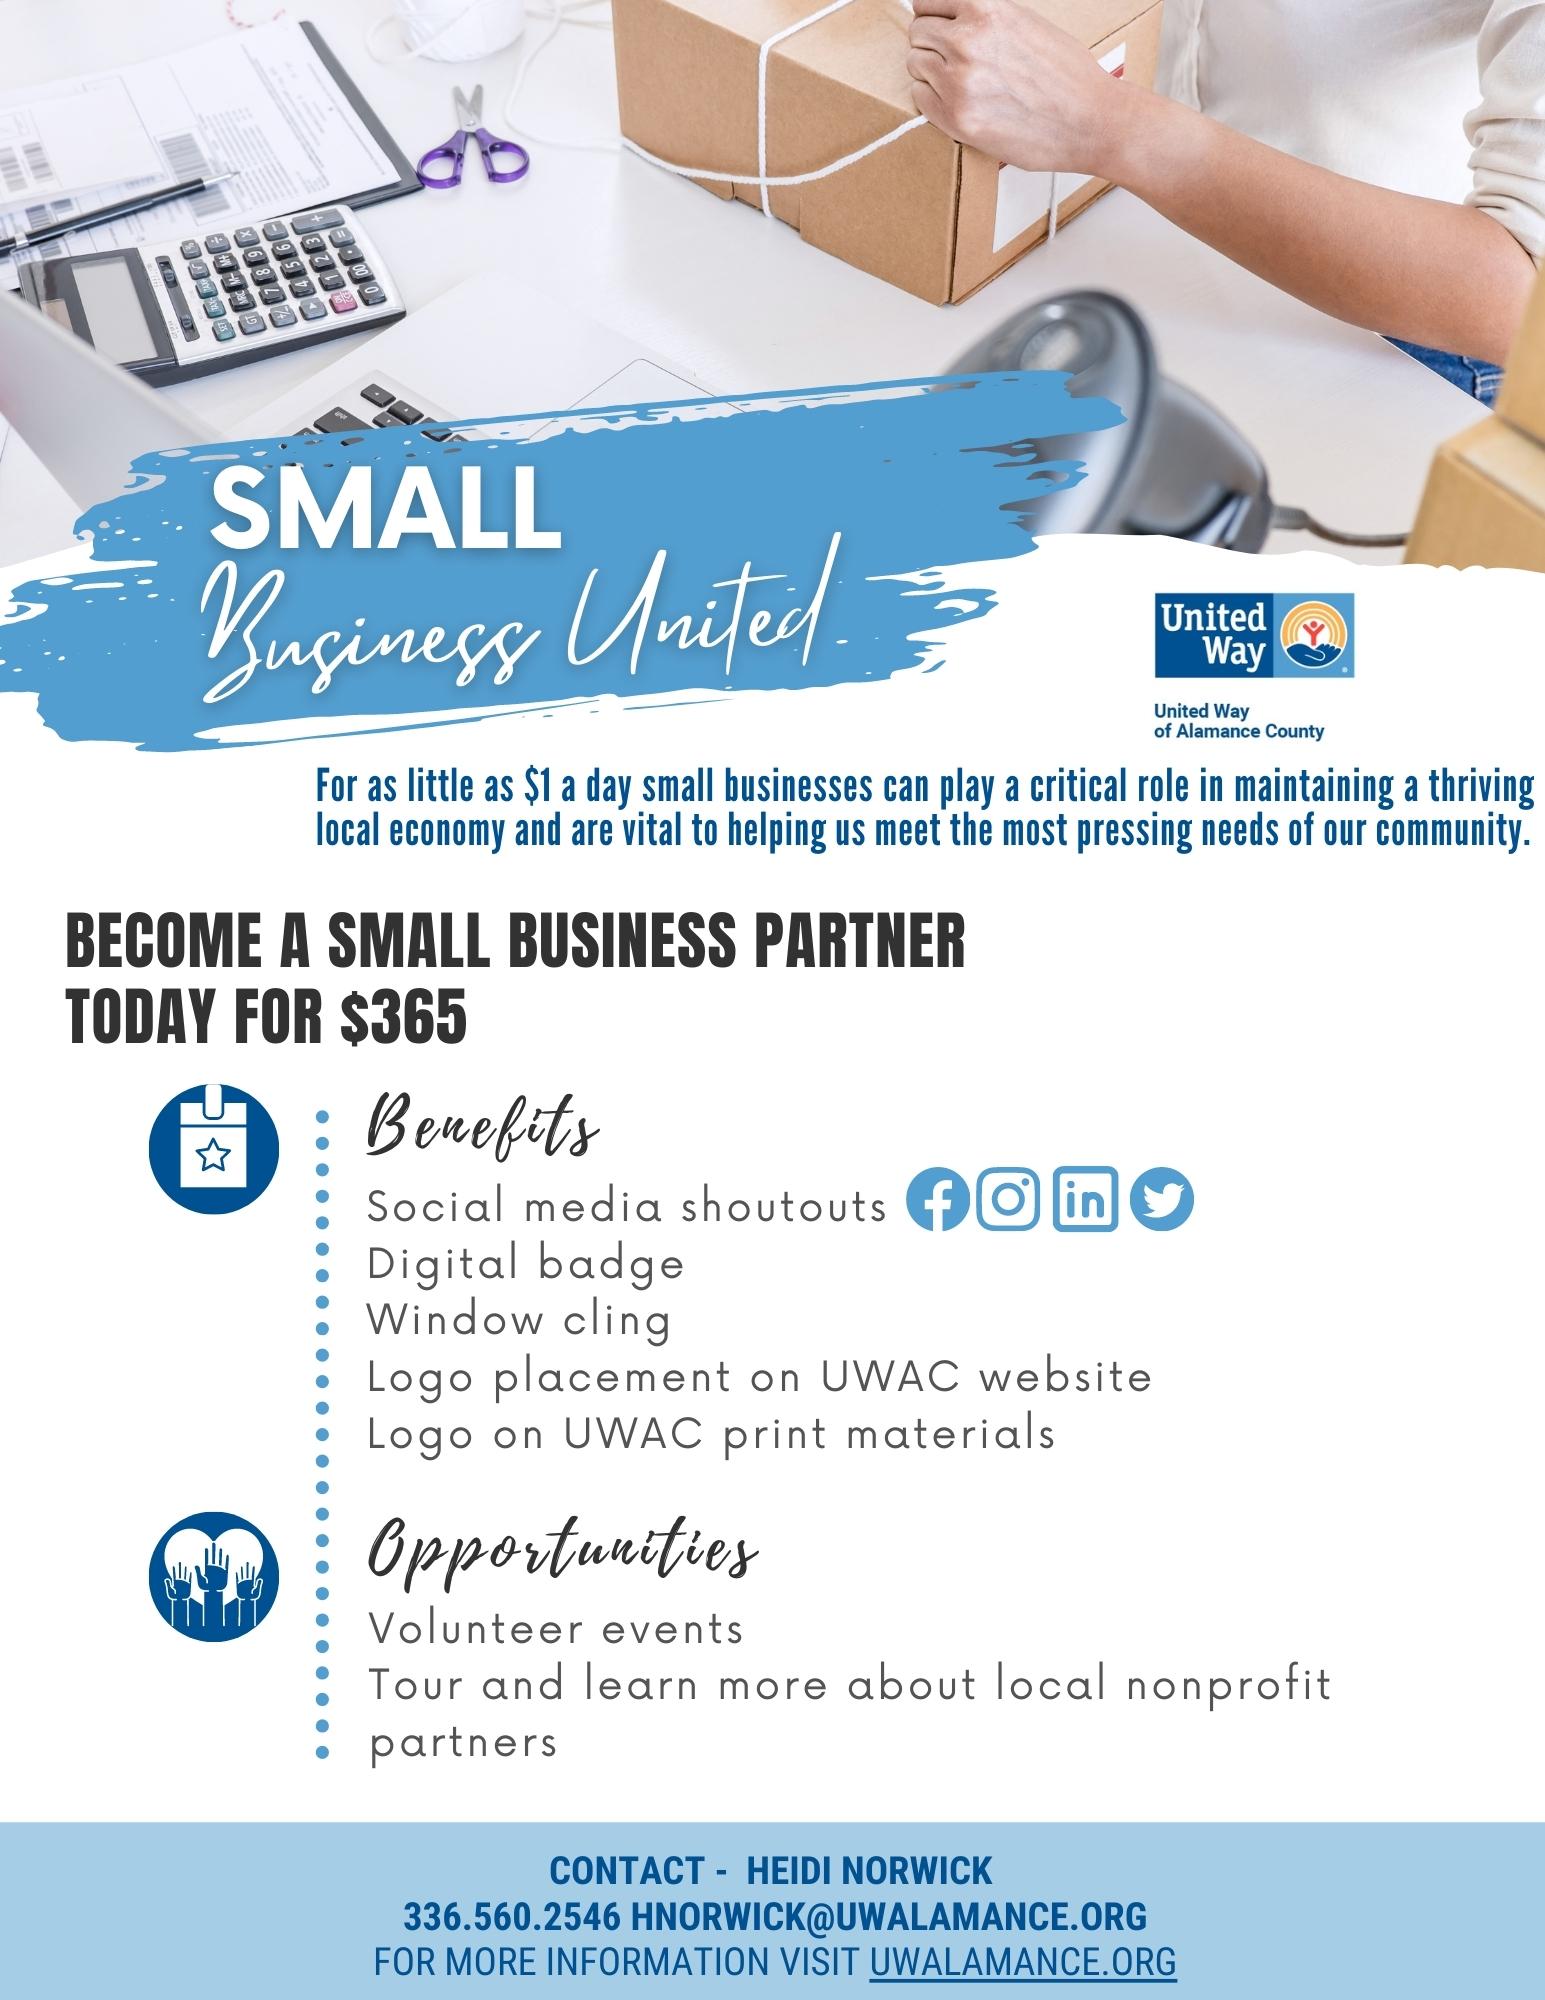 Small Business United